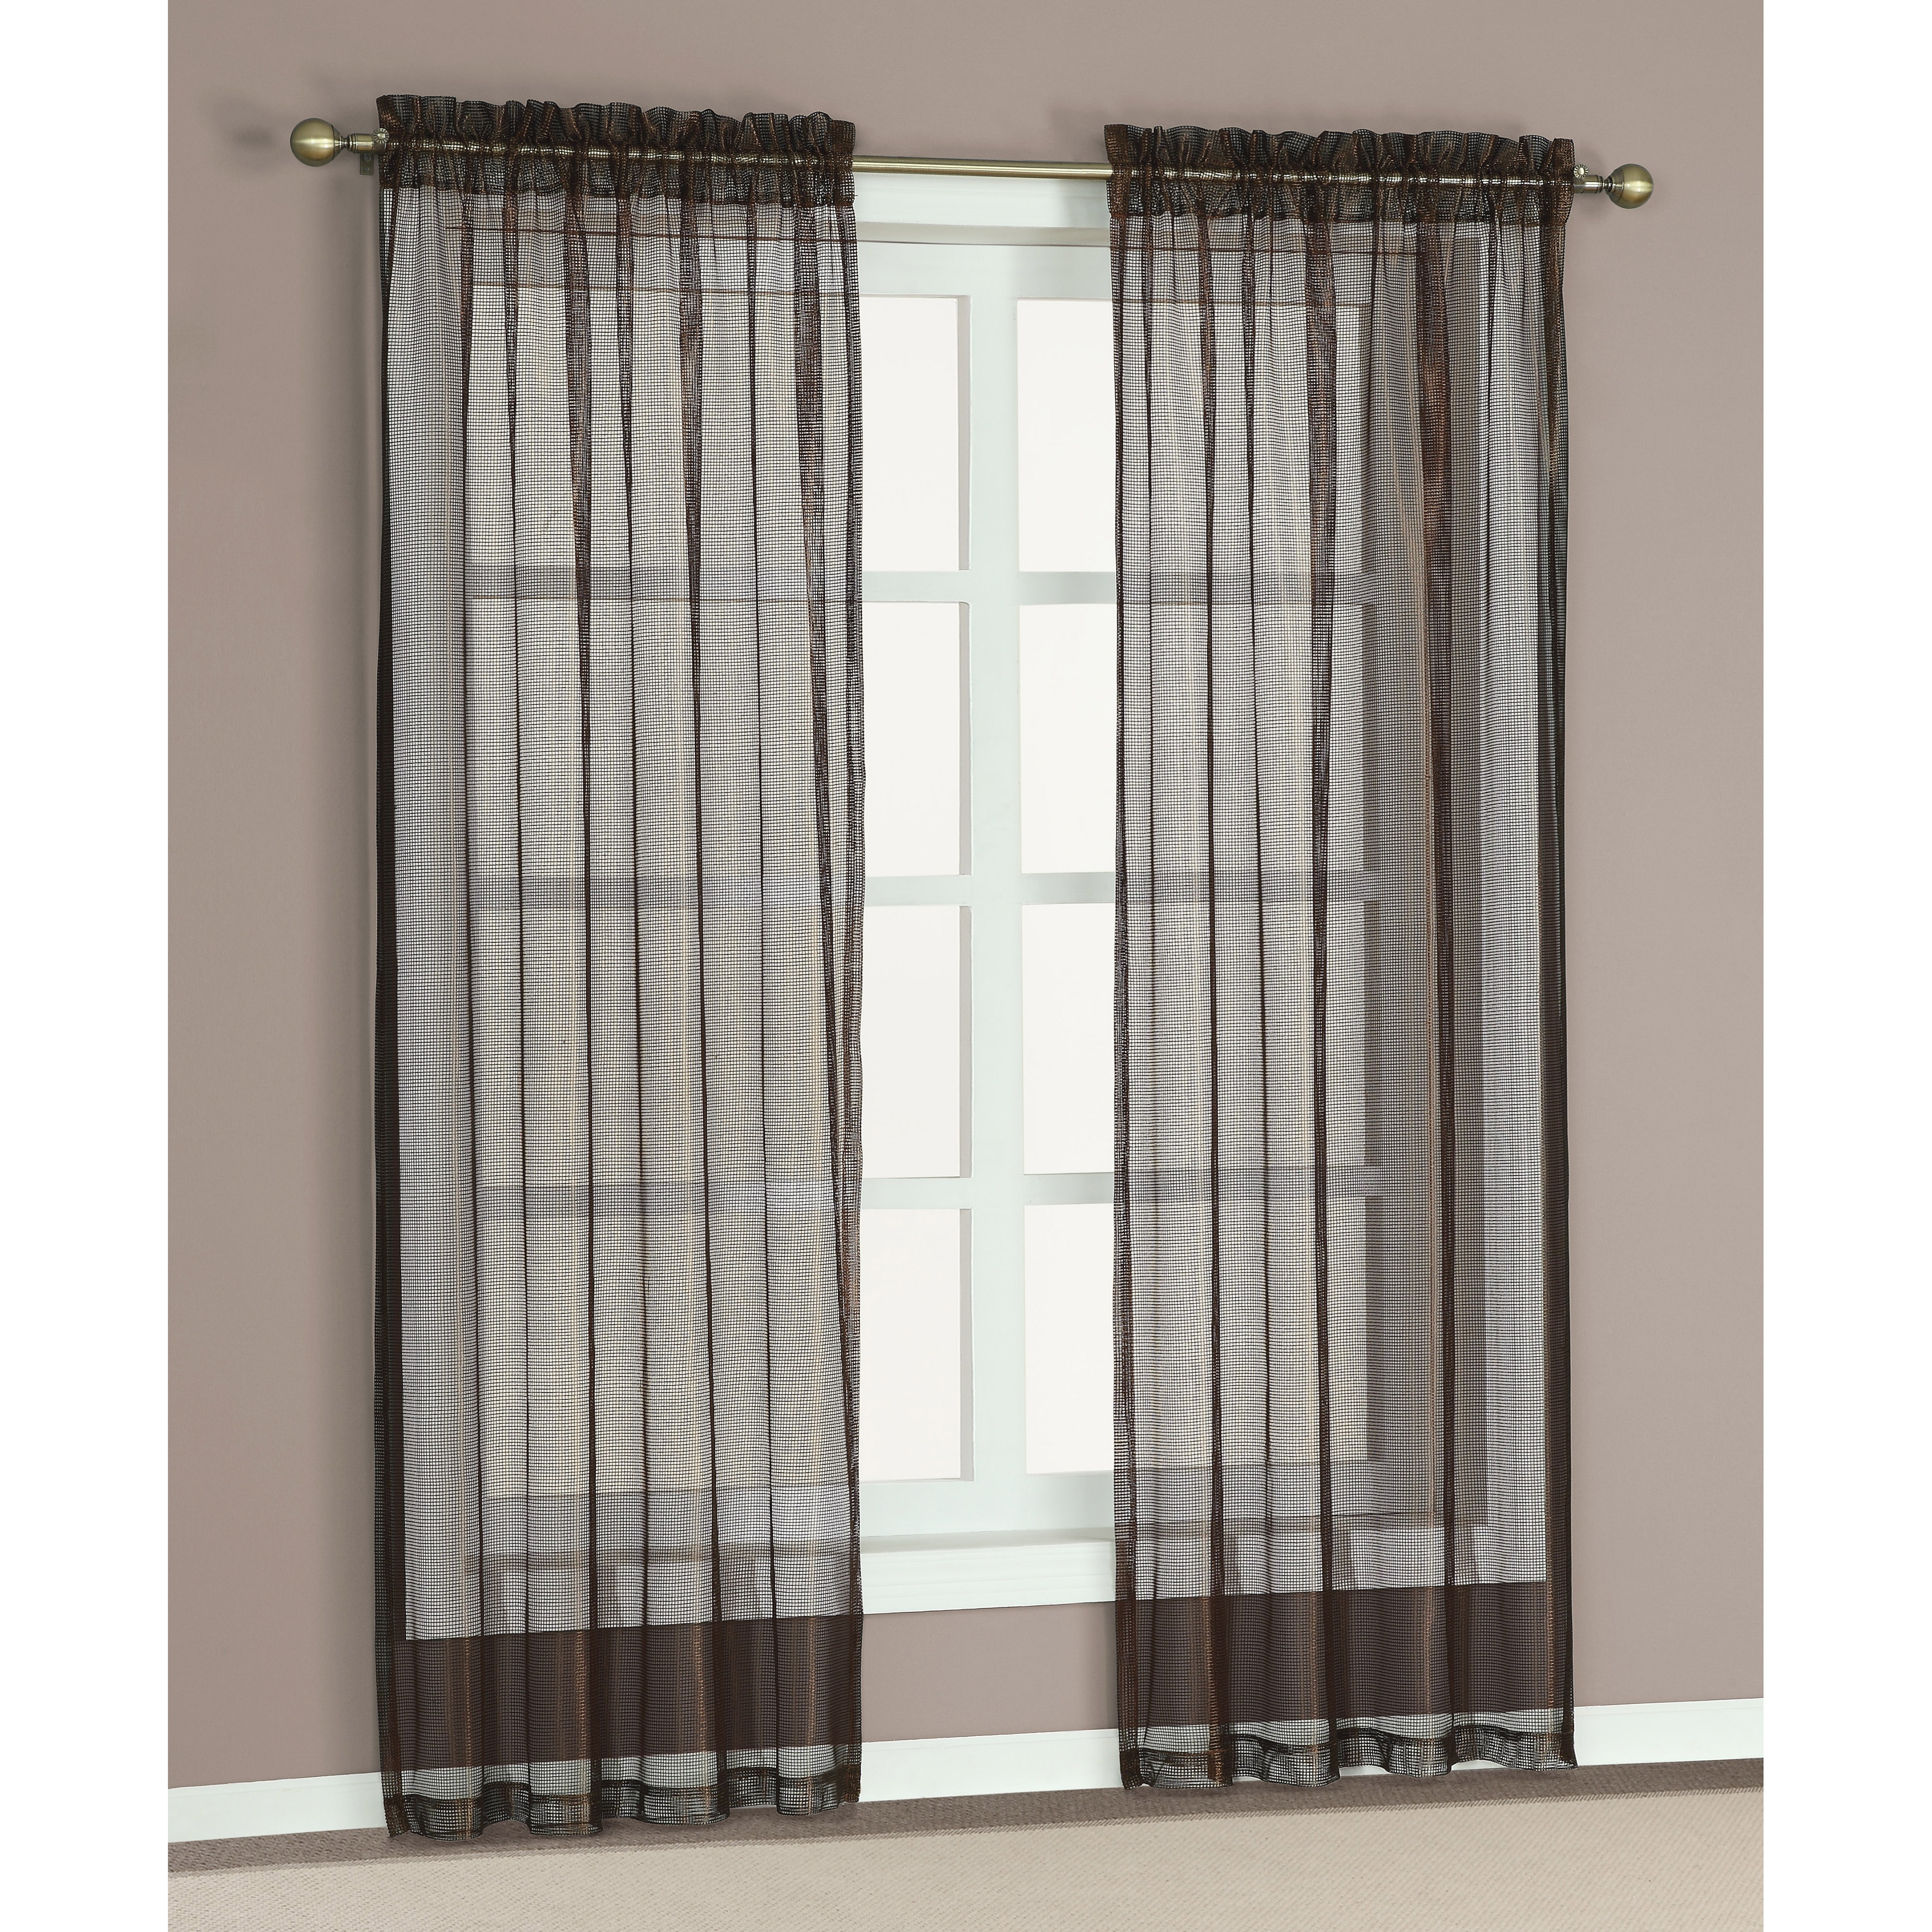 Welcome Industrial Corp Morena Sheer Curtain 84 inch Panel Pair Brown Size 50 x 84